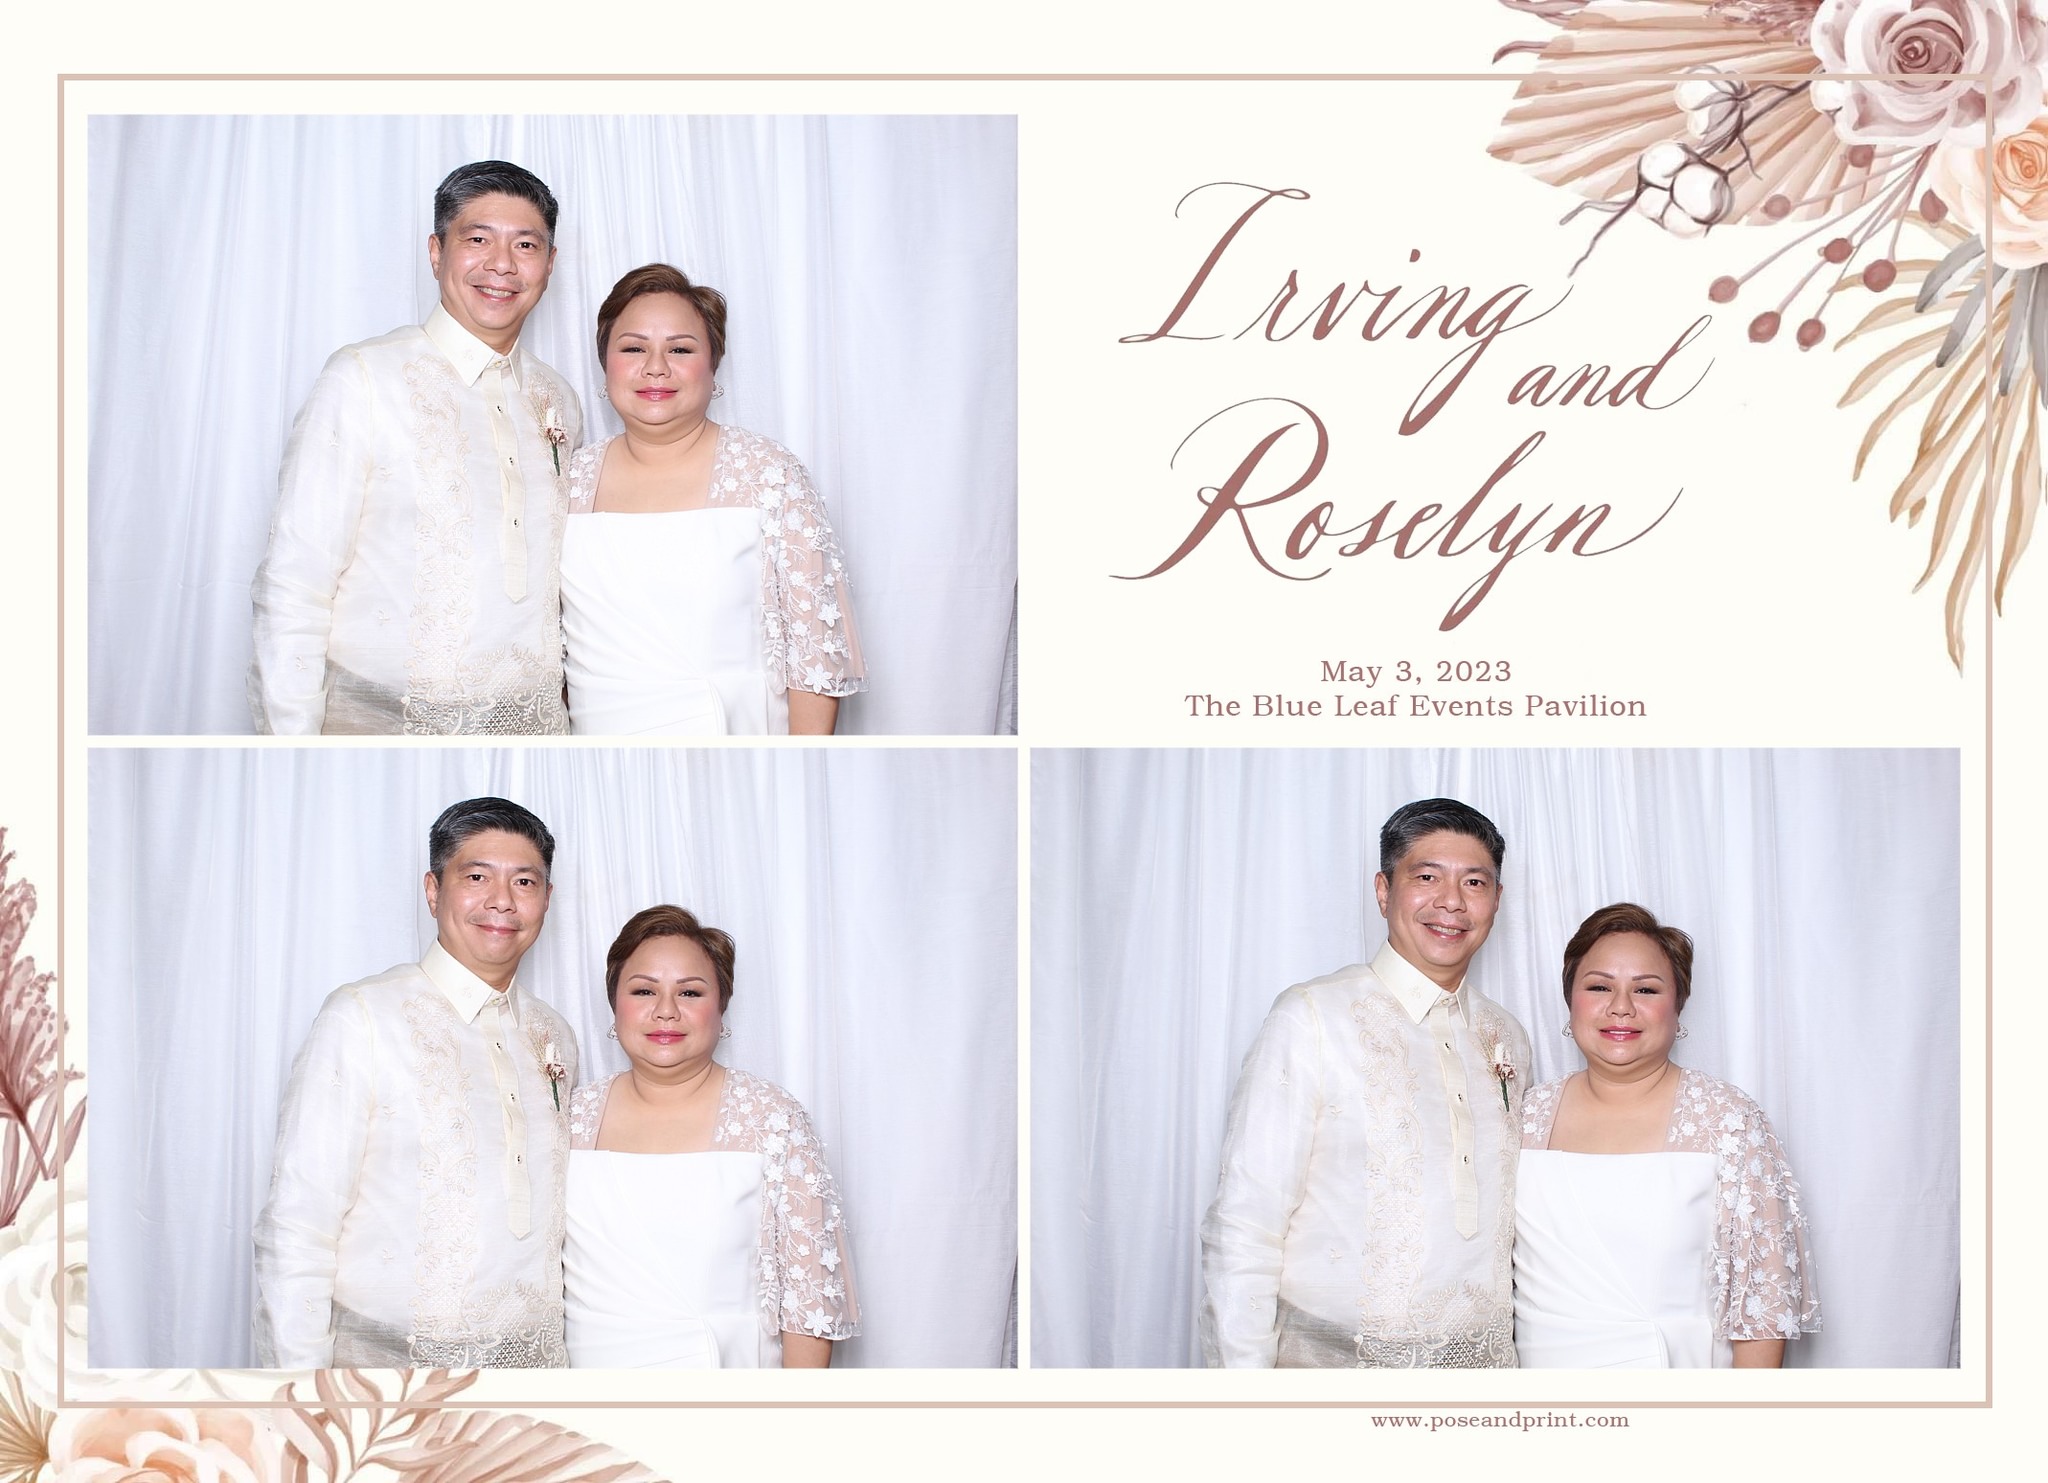 Irving and Roselyn’s Wedding